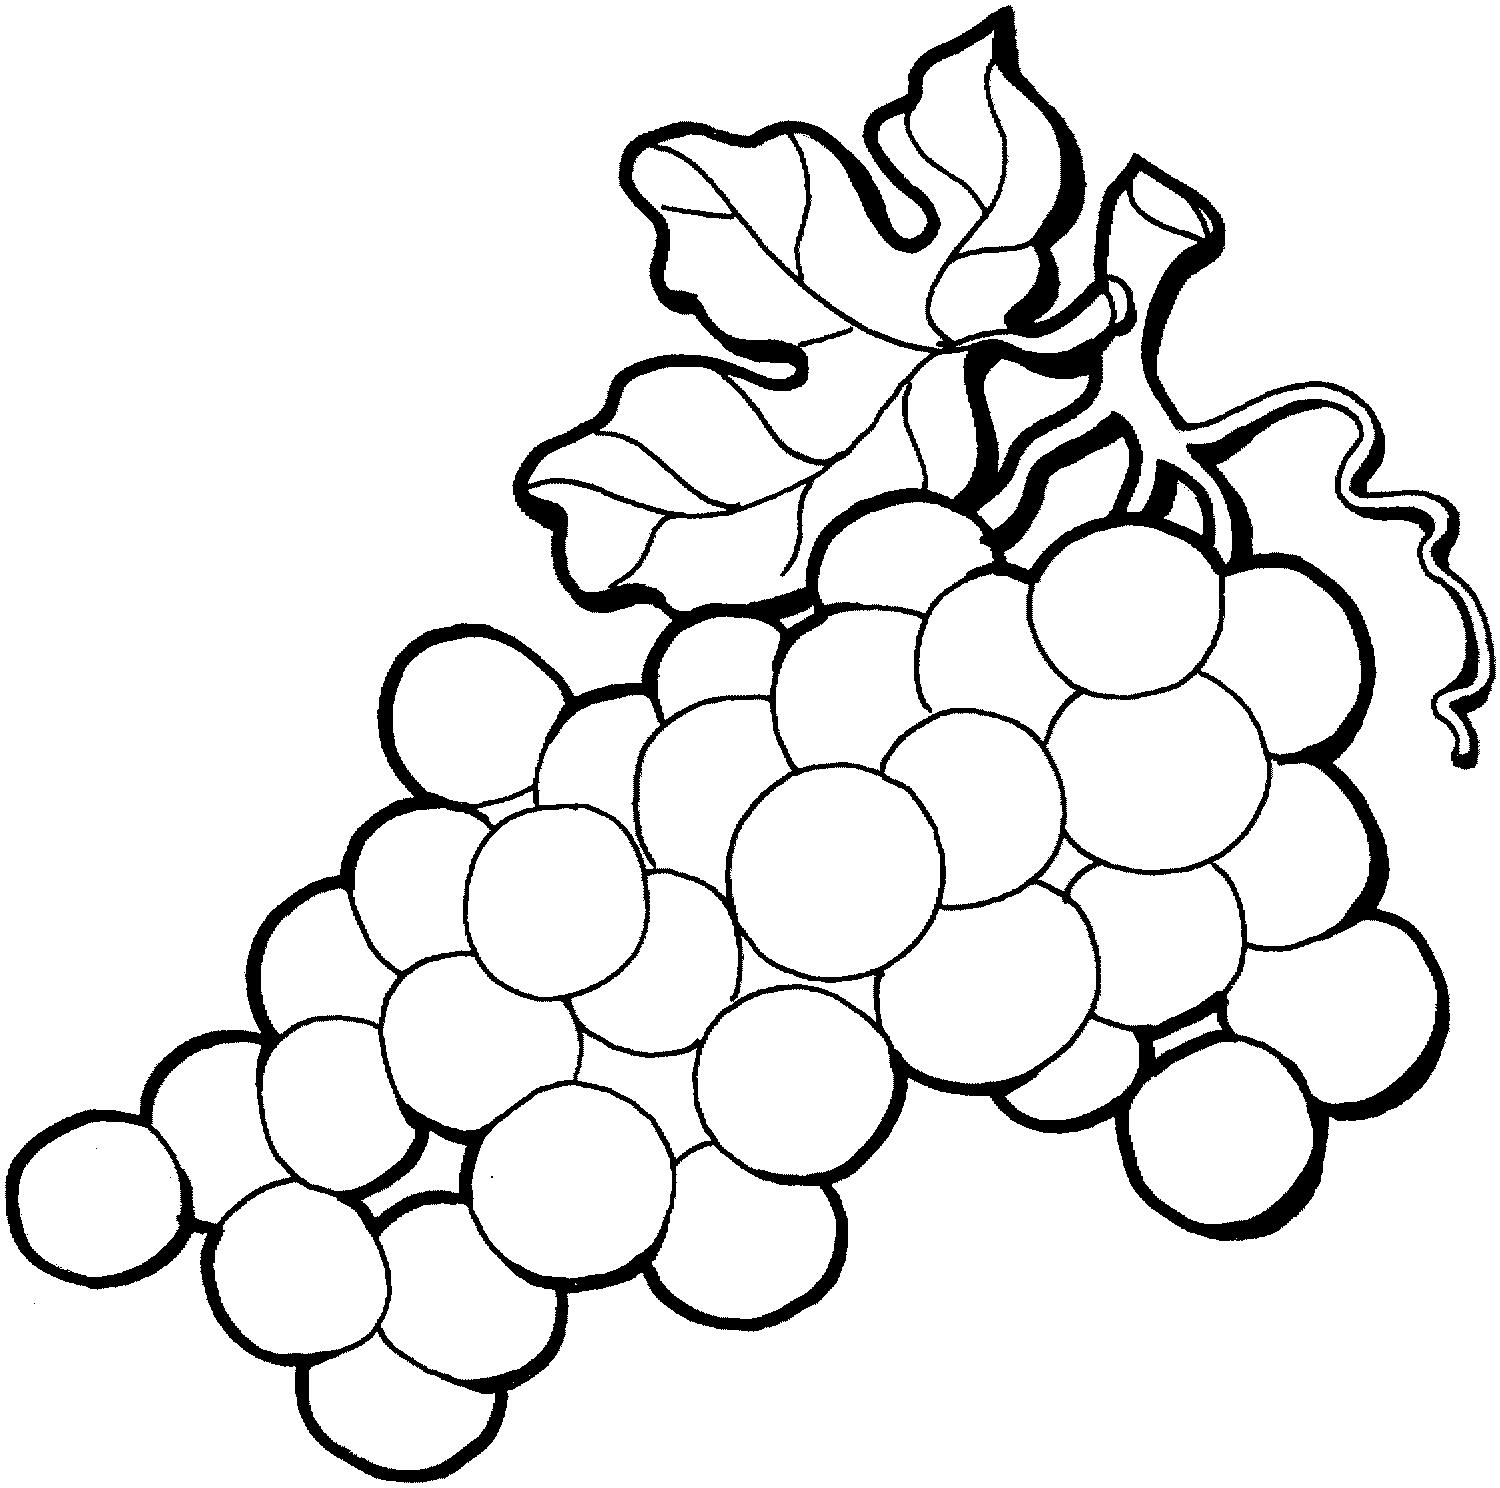 Drawing Of Grapes - Clipart library